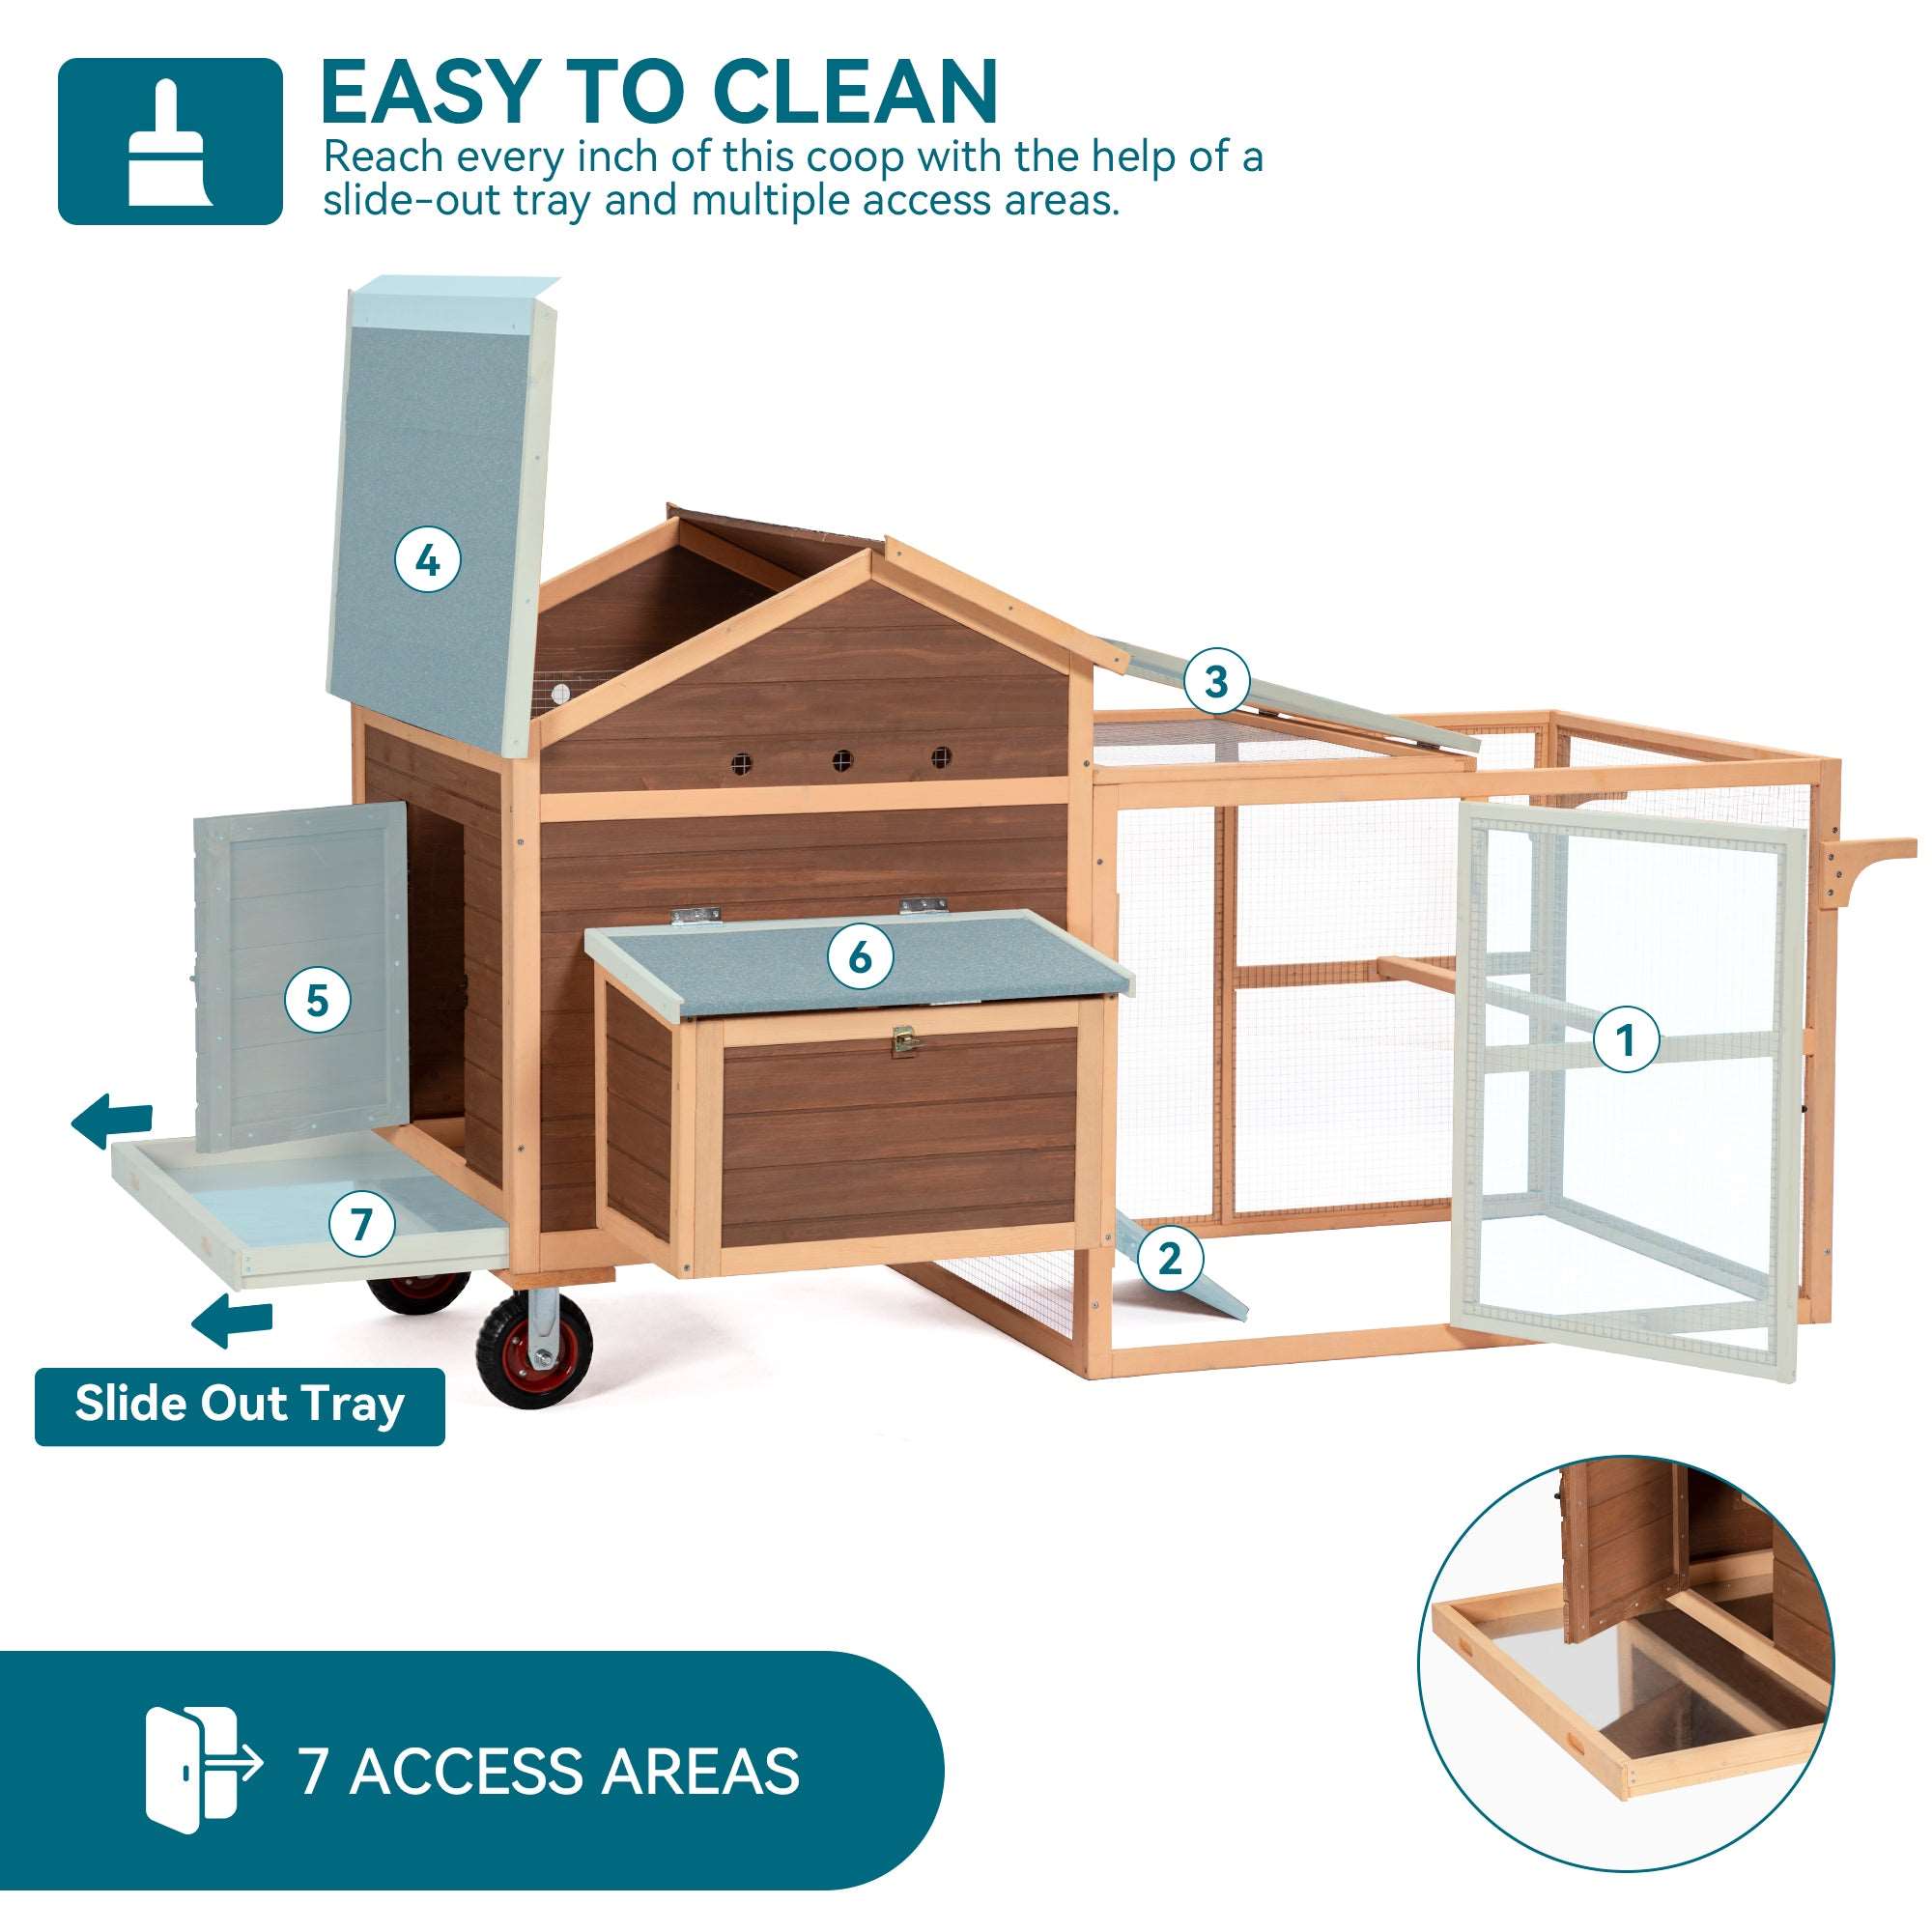 petsfit-large-chicken-coop-tractor-81-hen-house-outdoor-waterproof-poultry-cage-with-nesting-box-wheels-5-access-areas-pull-out-tray-for-easy-cleaning-02